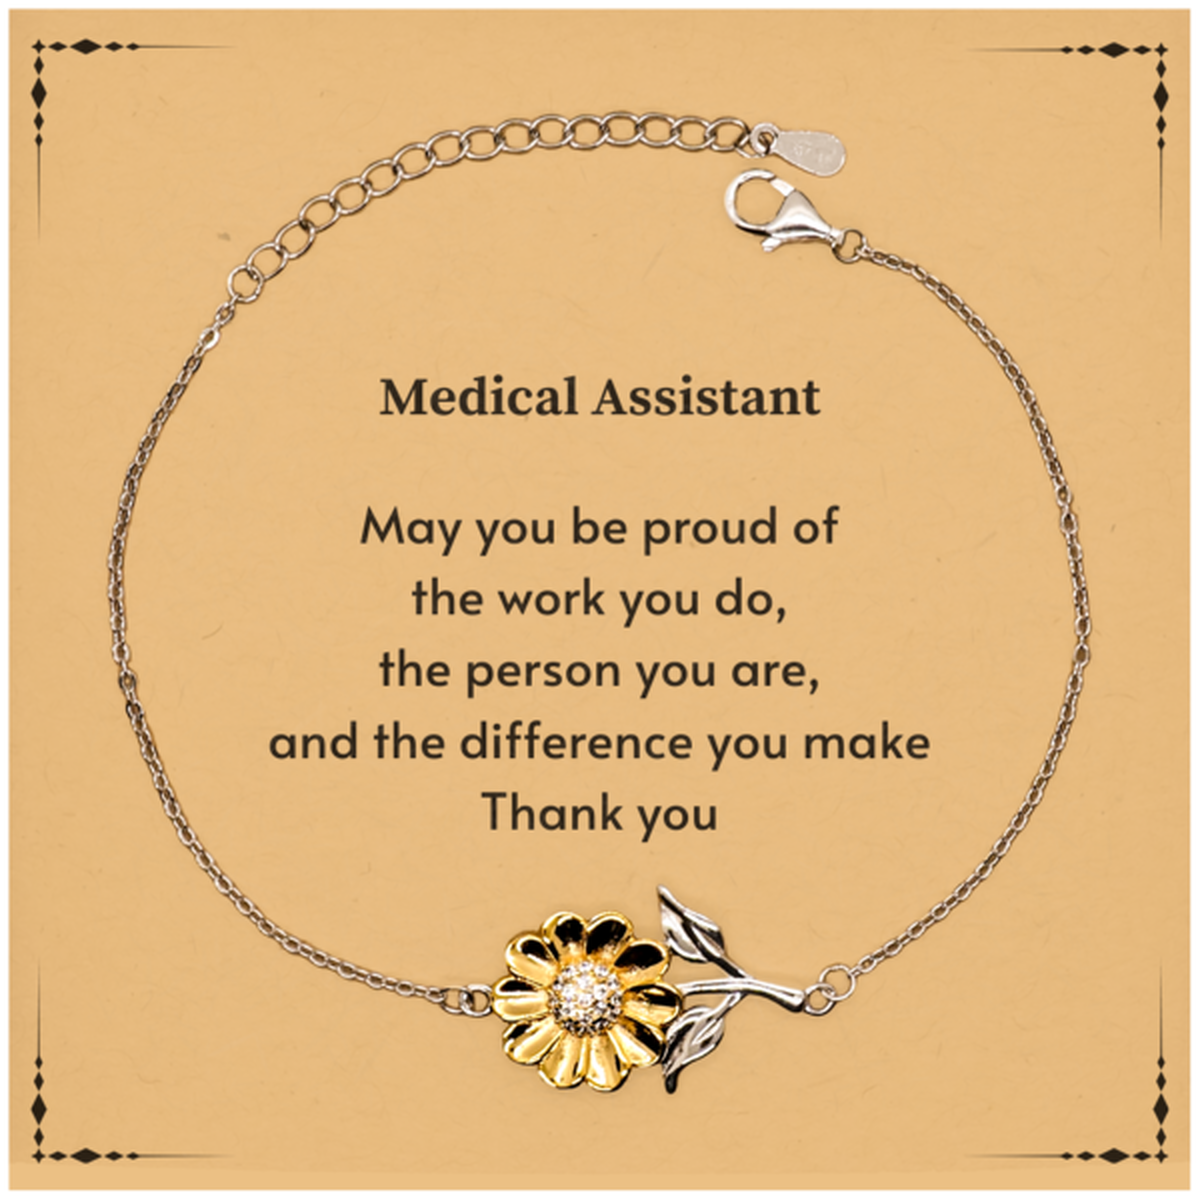 Heartwarming Sunflower Bracelet Retirement Coworkers Gifts for Medical Assistant, Medical Assistant May You be proud of the work you do, the person you are Gifts for Boss Men Women Friends